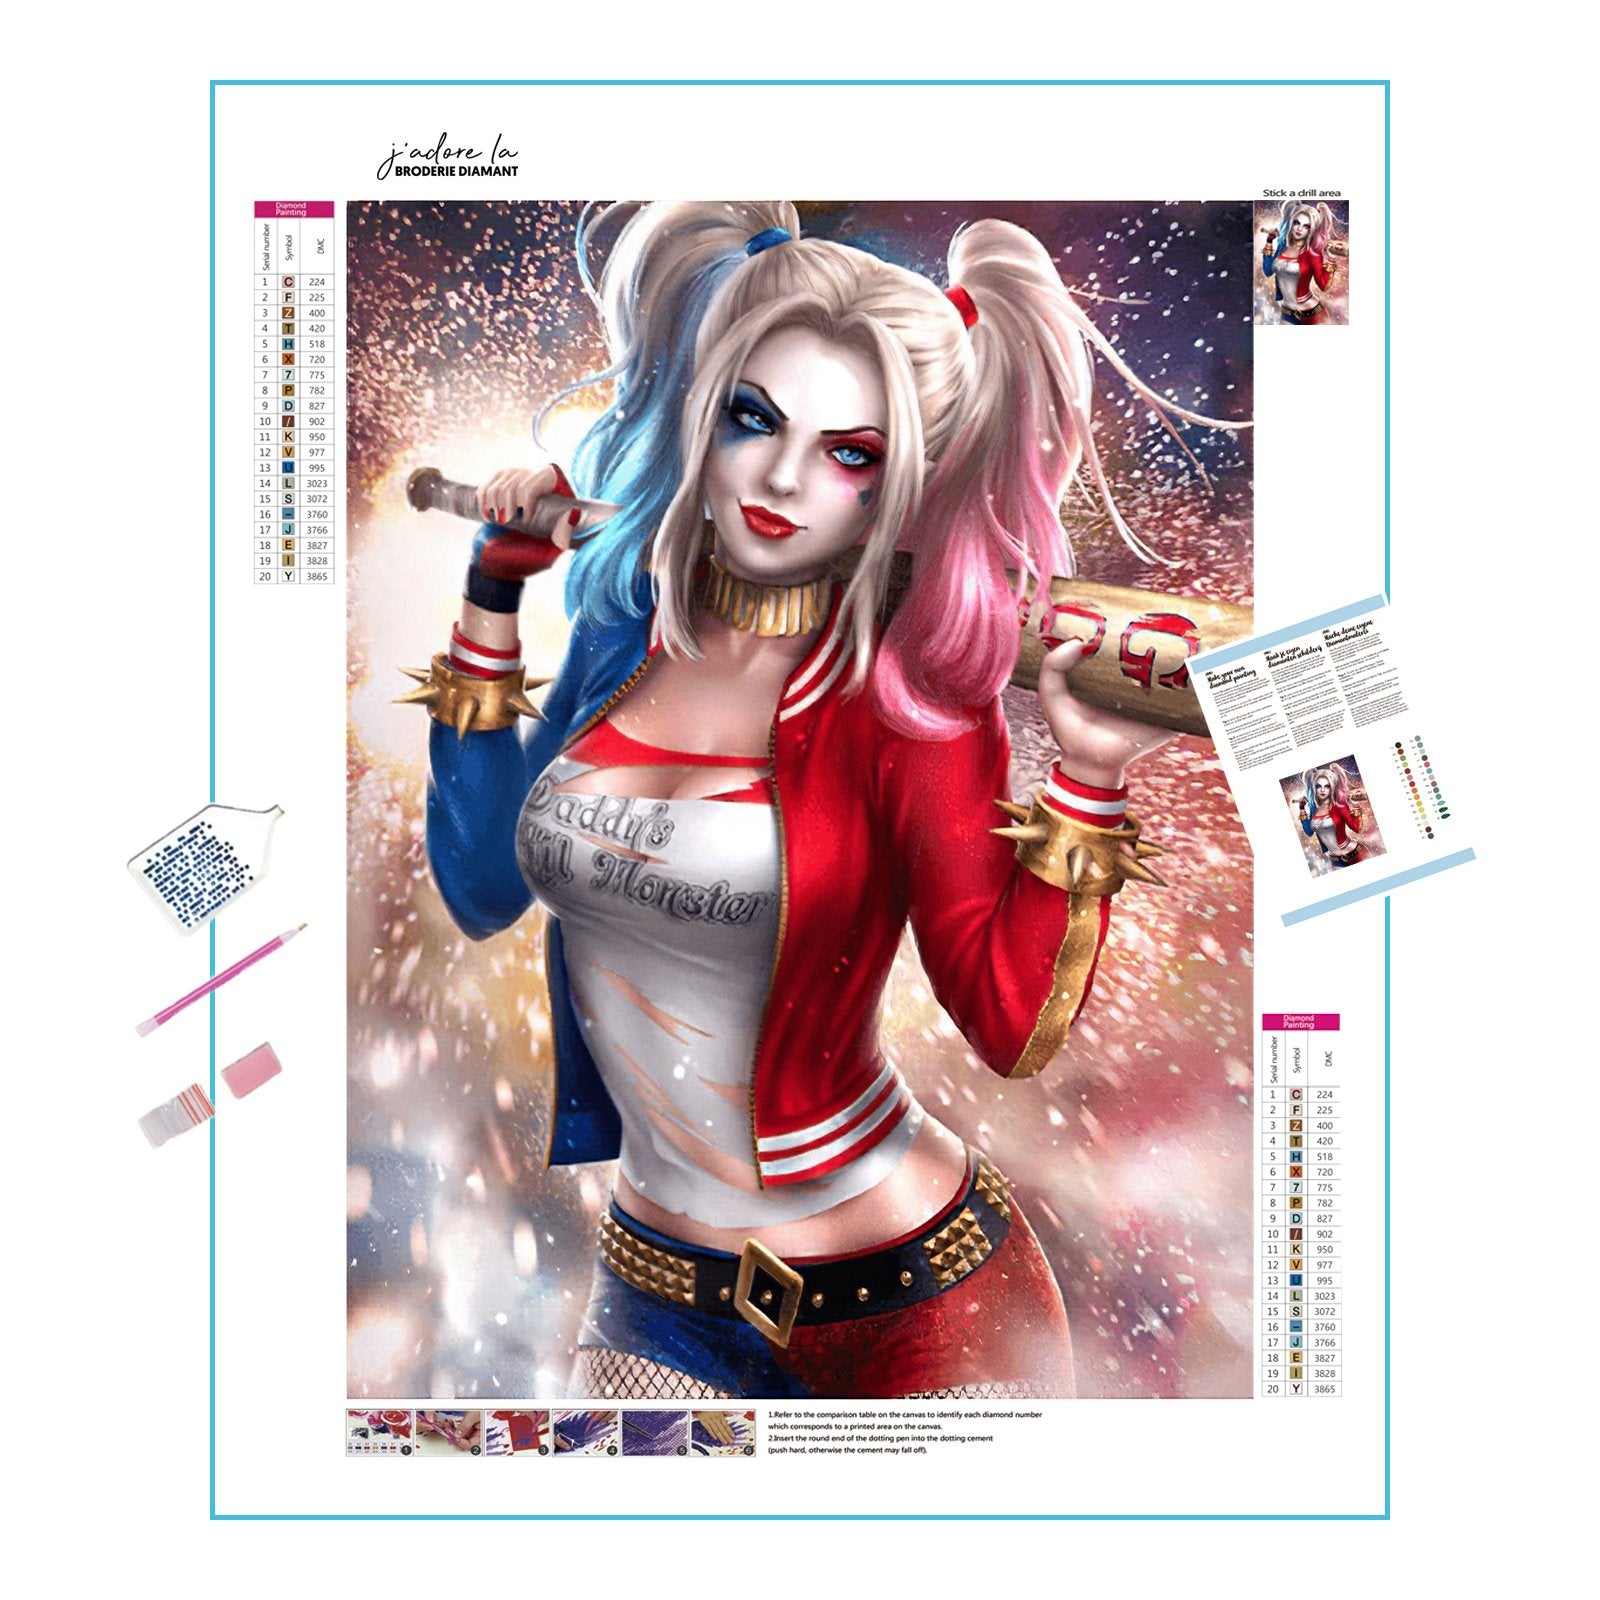 Dive into chaos with the iconic Harley Quinn artwork.Harley Quinn - Diamondartlove